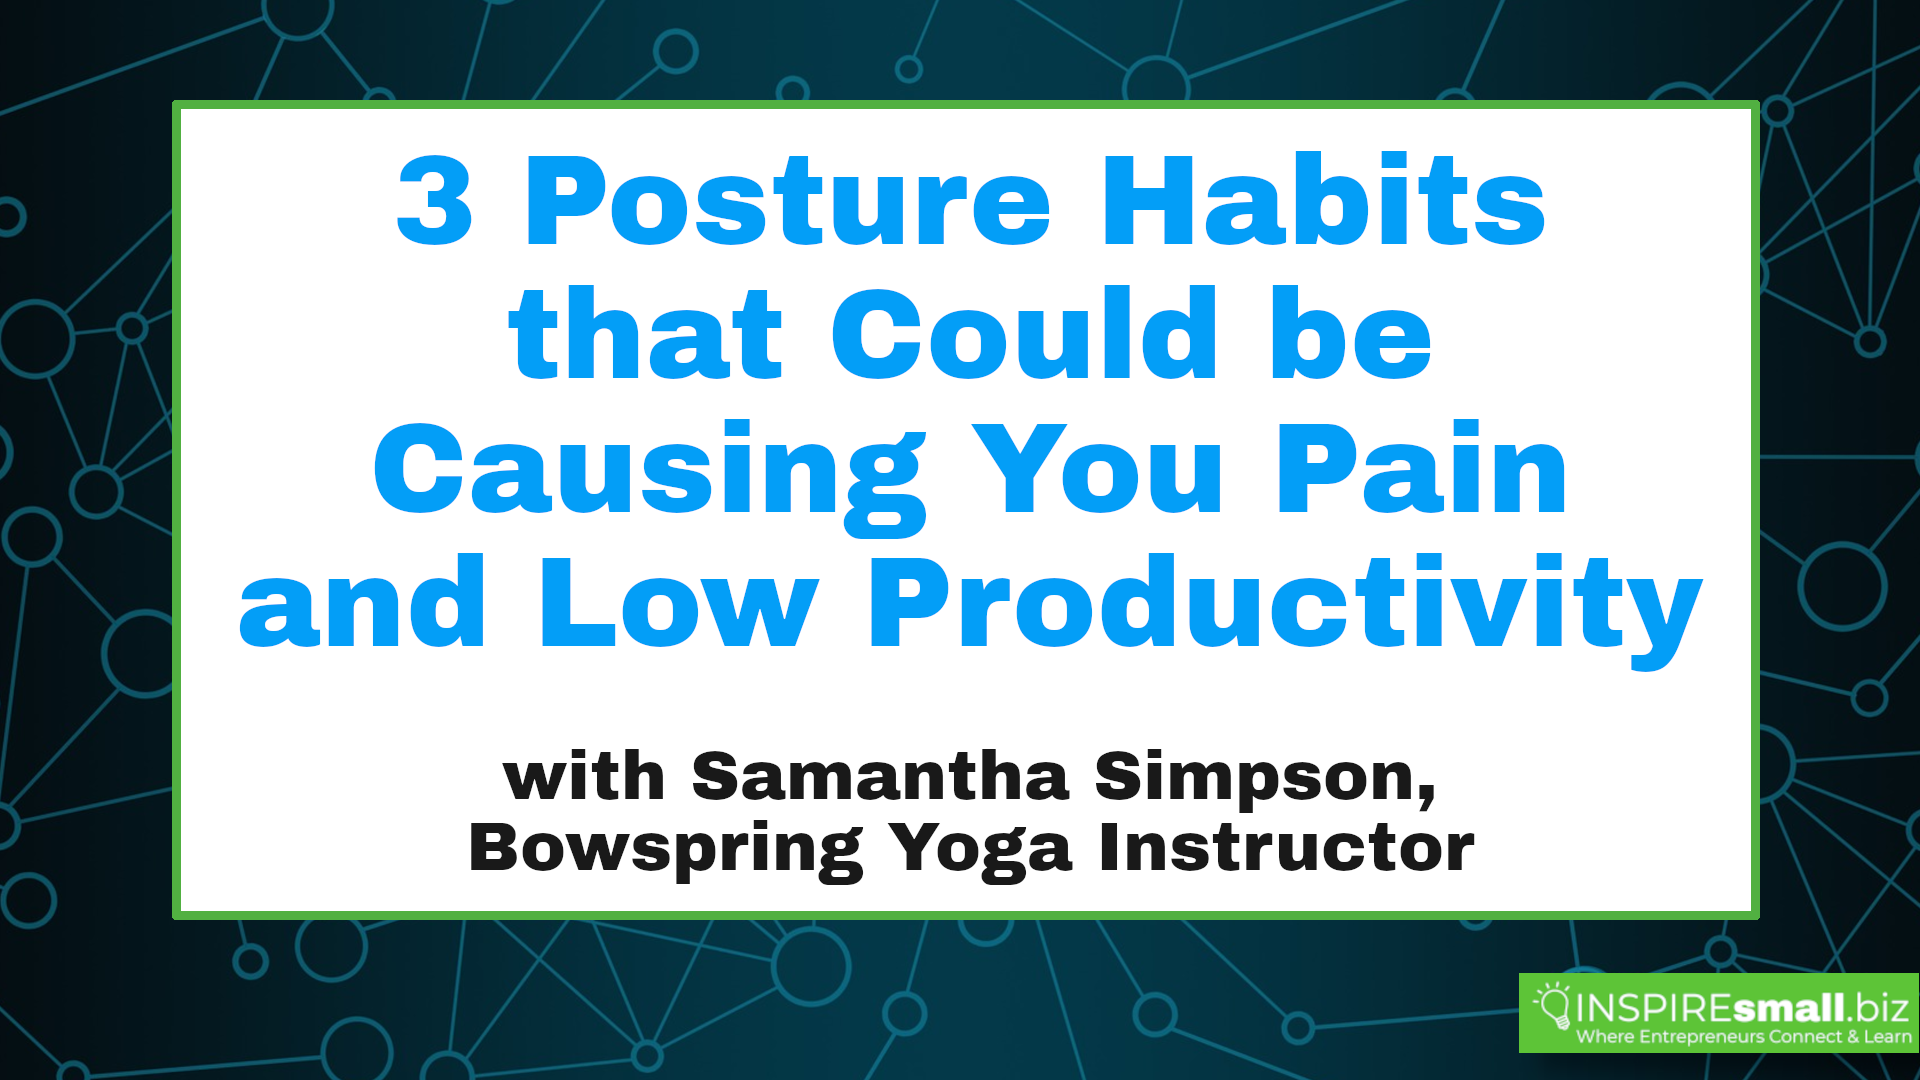 3 Posture Habits that Could be Causing You Pain and Low Productivity with Samantha Simpson, Bowspring Yoga Instructor, hosted by INSPIREsmall.biz